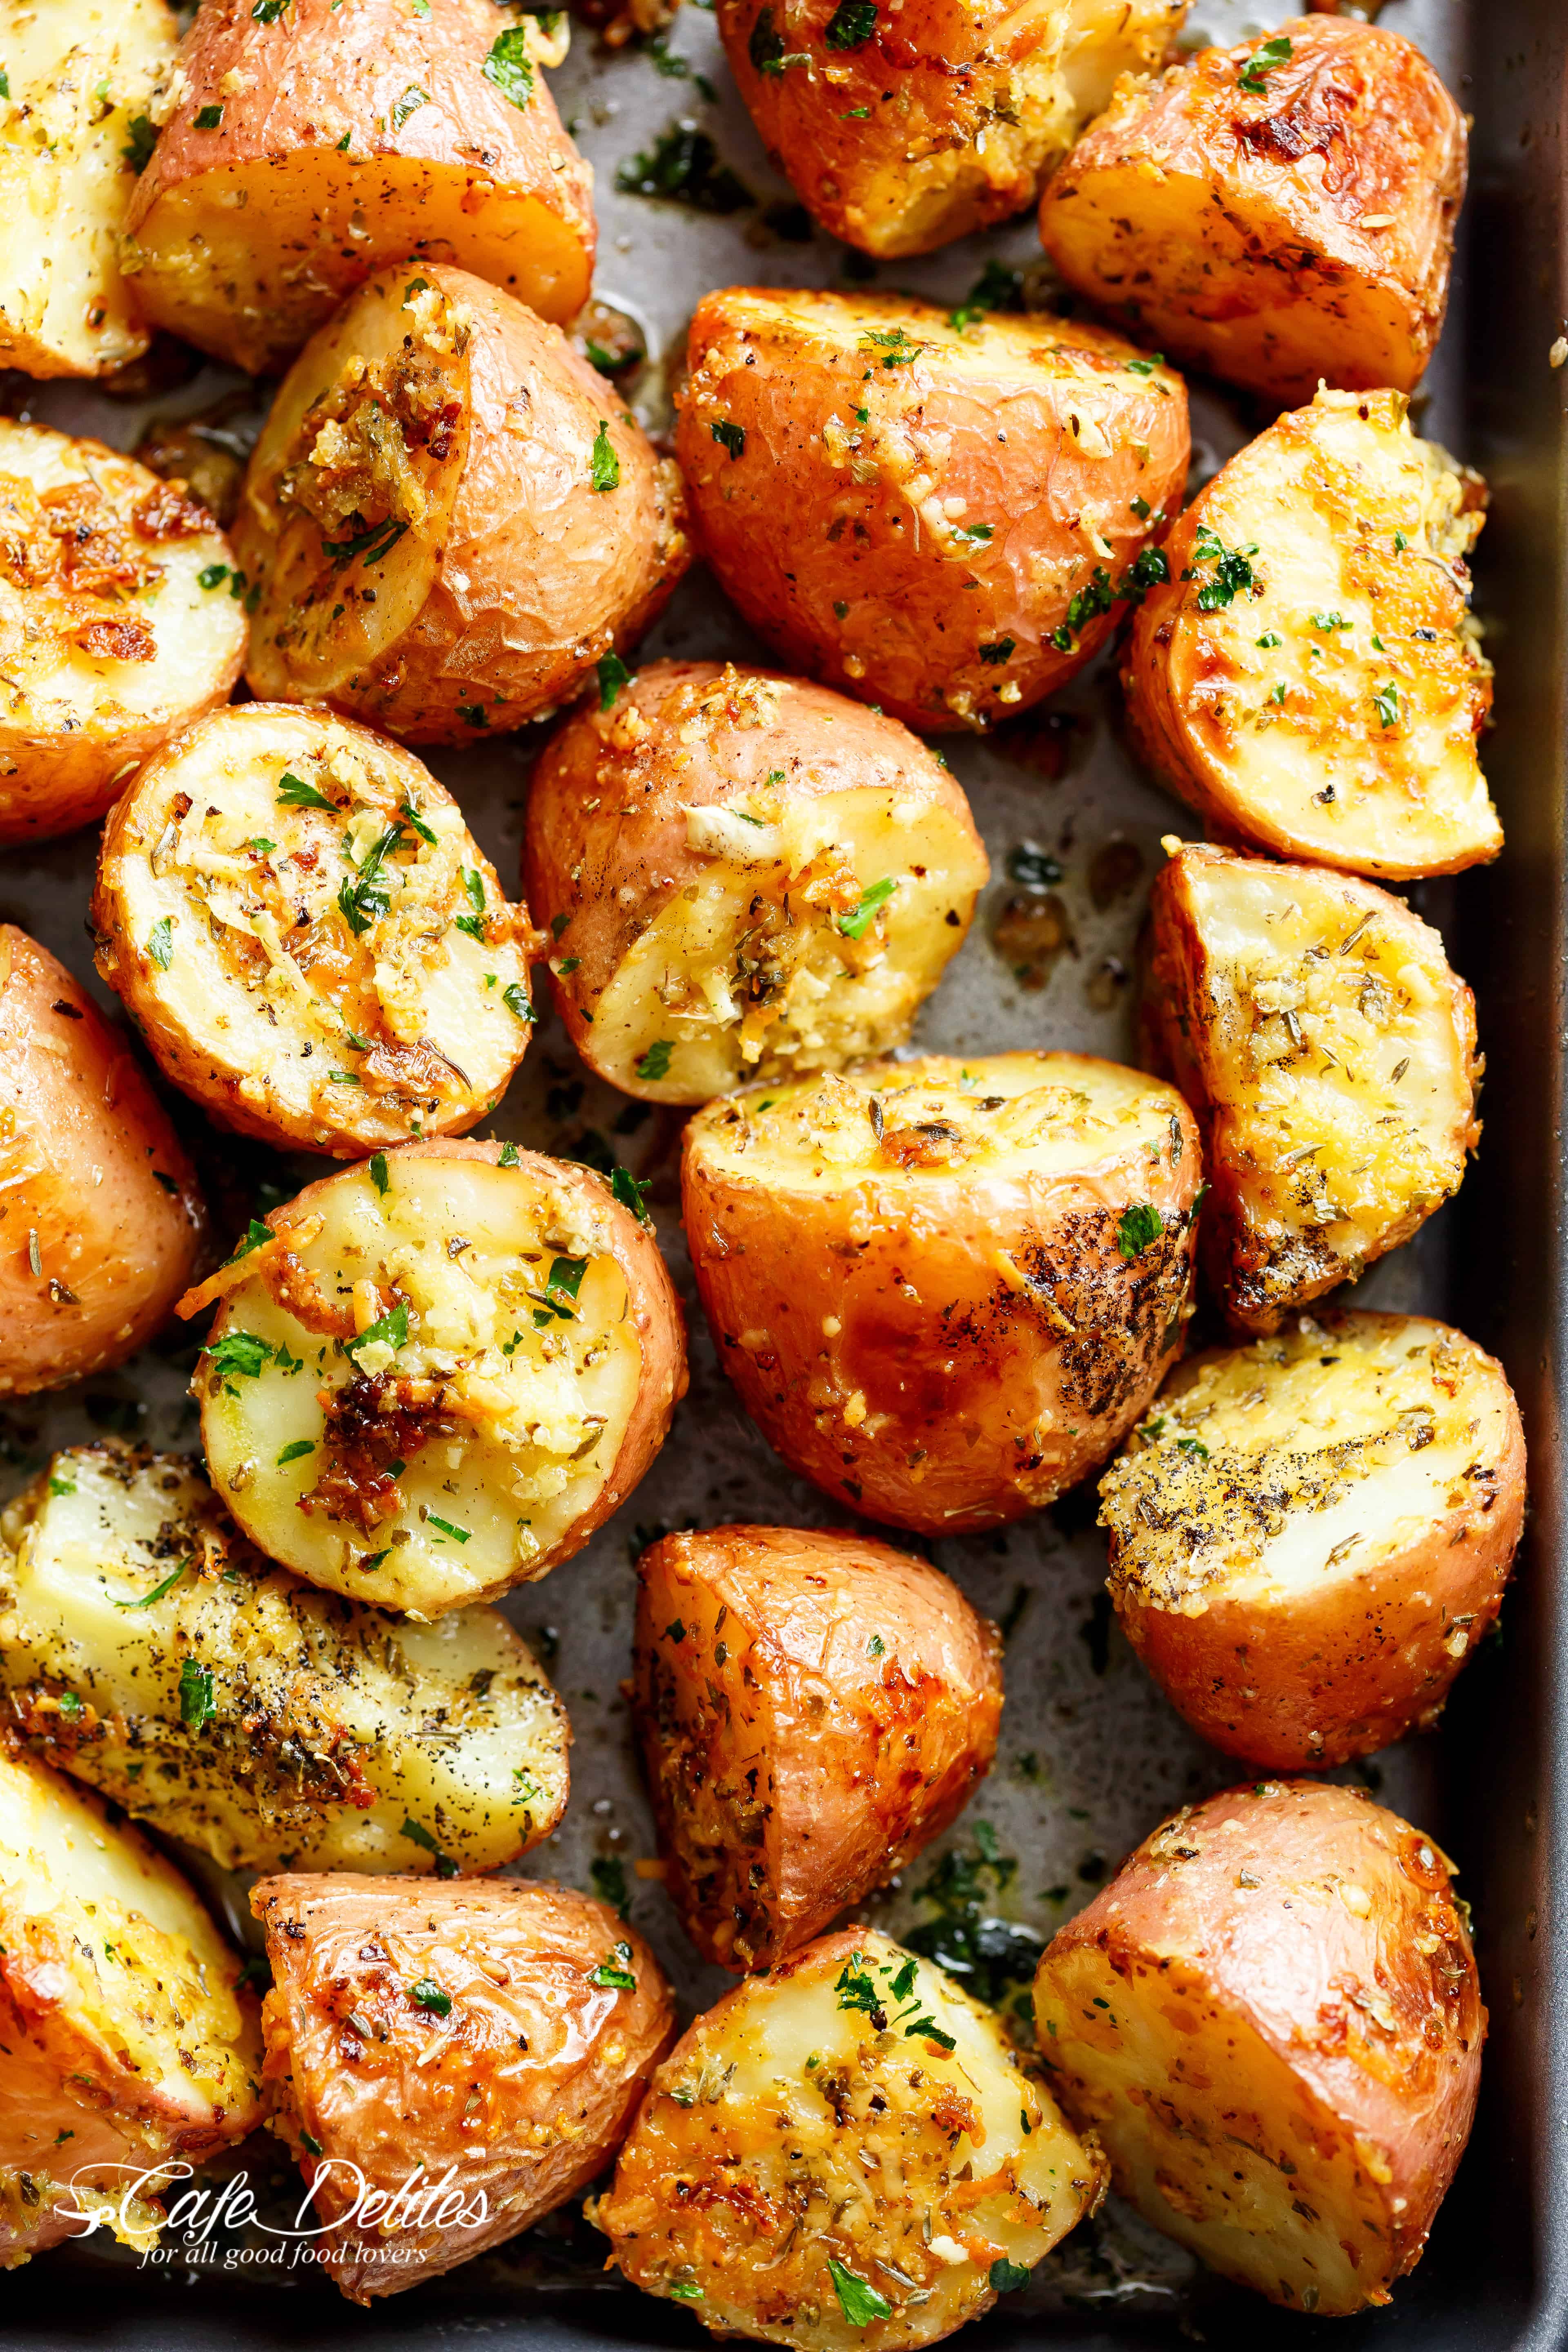 Herbs, garlic, and parmesan cheese are roasted together to make the best Crispy Browned Butter Parmesan Roasted Potatoes! A delicious side dish with so much flavour, these potatoes go with ANYTHING! | cafedelites.com